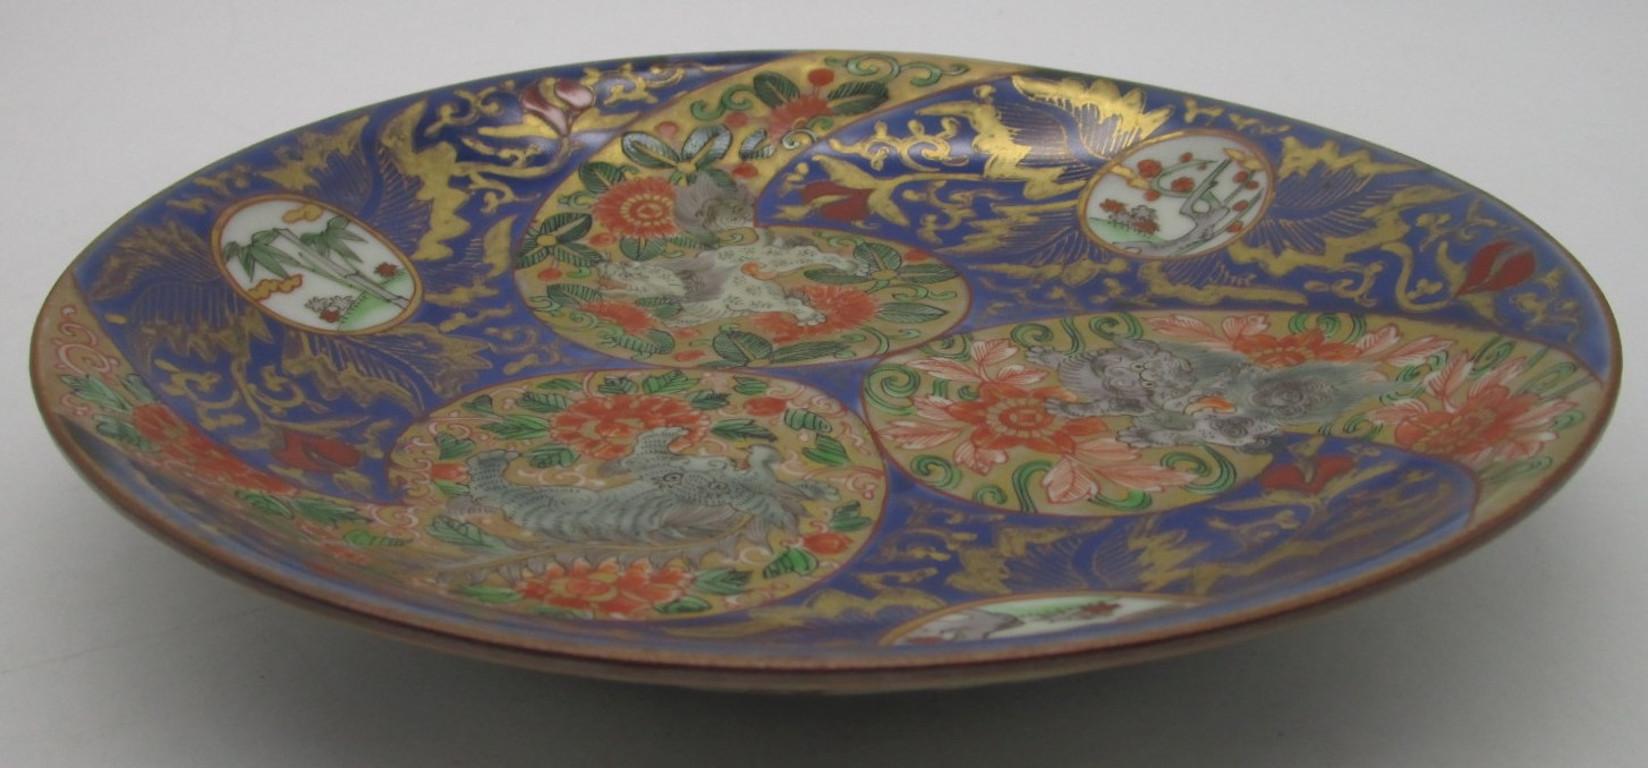 Late 19th Century Japanese Meiji Period Gold Cobalt Blue Porcelain Charger, circa 1880 For Sale